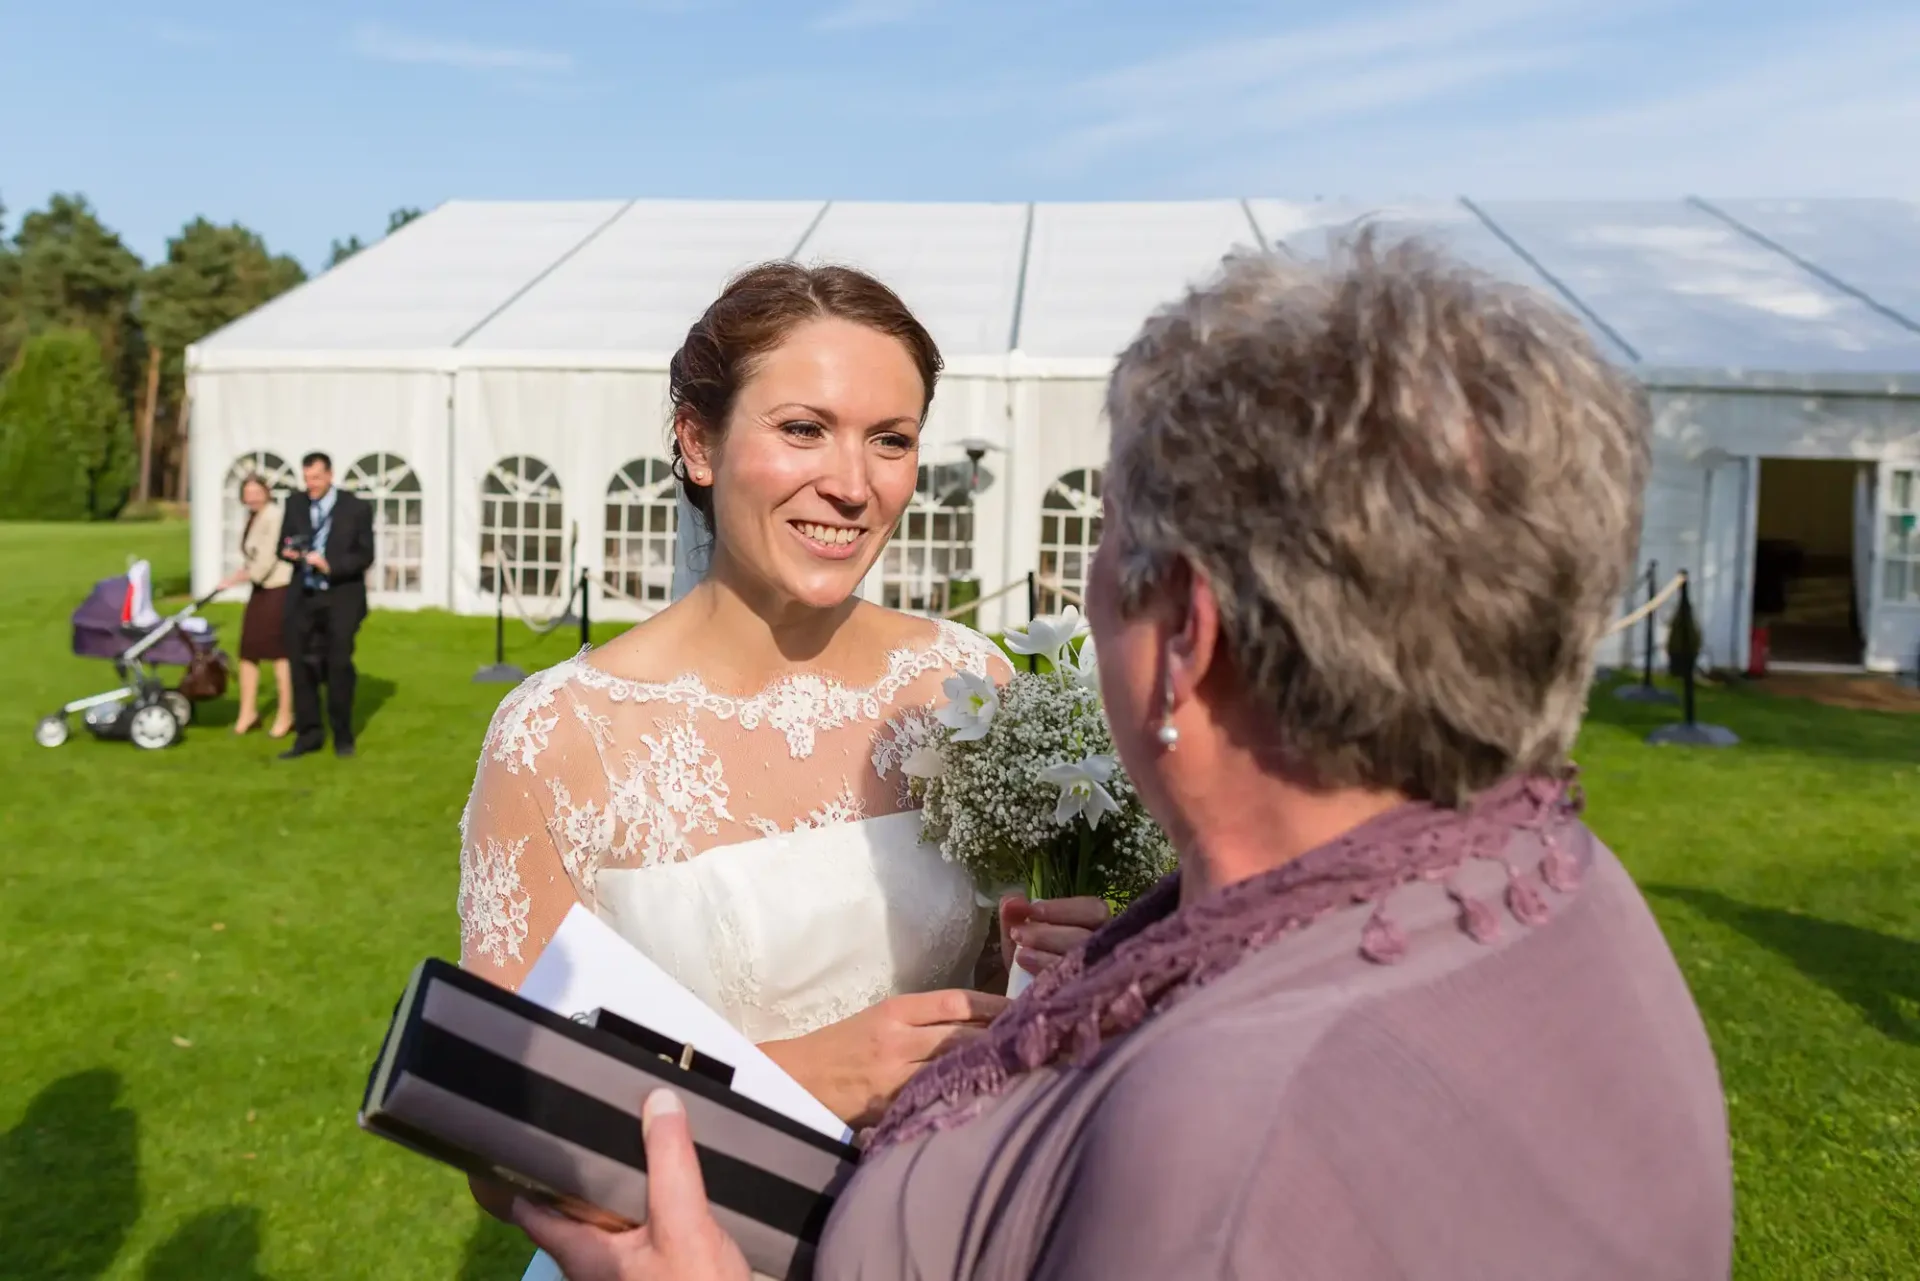 A bride in a lace wedding gown smiling at an older woman holding a gift box, with a wedding marquee and guests in the background on a sunny day.